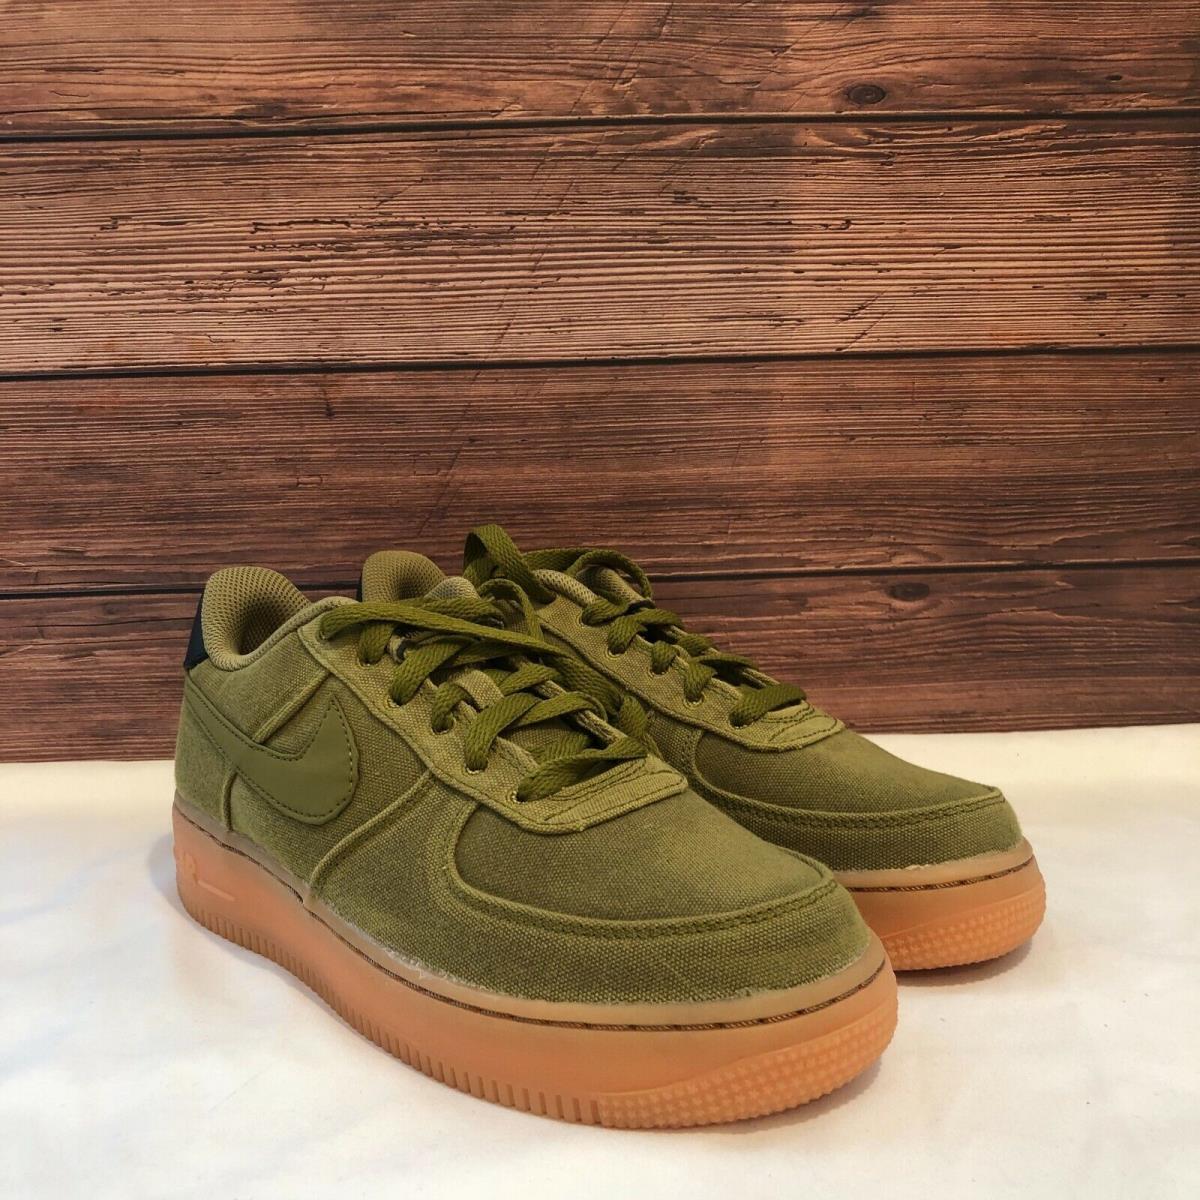 Nike Air Force 1 LV8 Style GS `camper Green` Classic Athletic Shoes  AR0735-300, - Nike shoes Air Force - Green